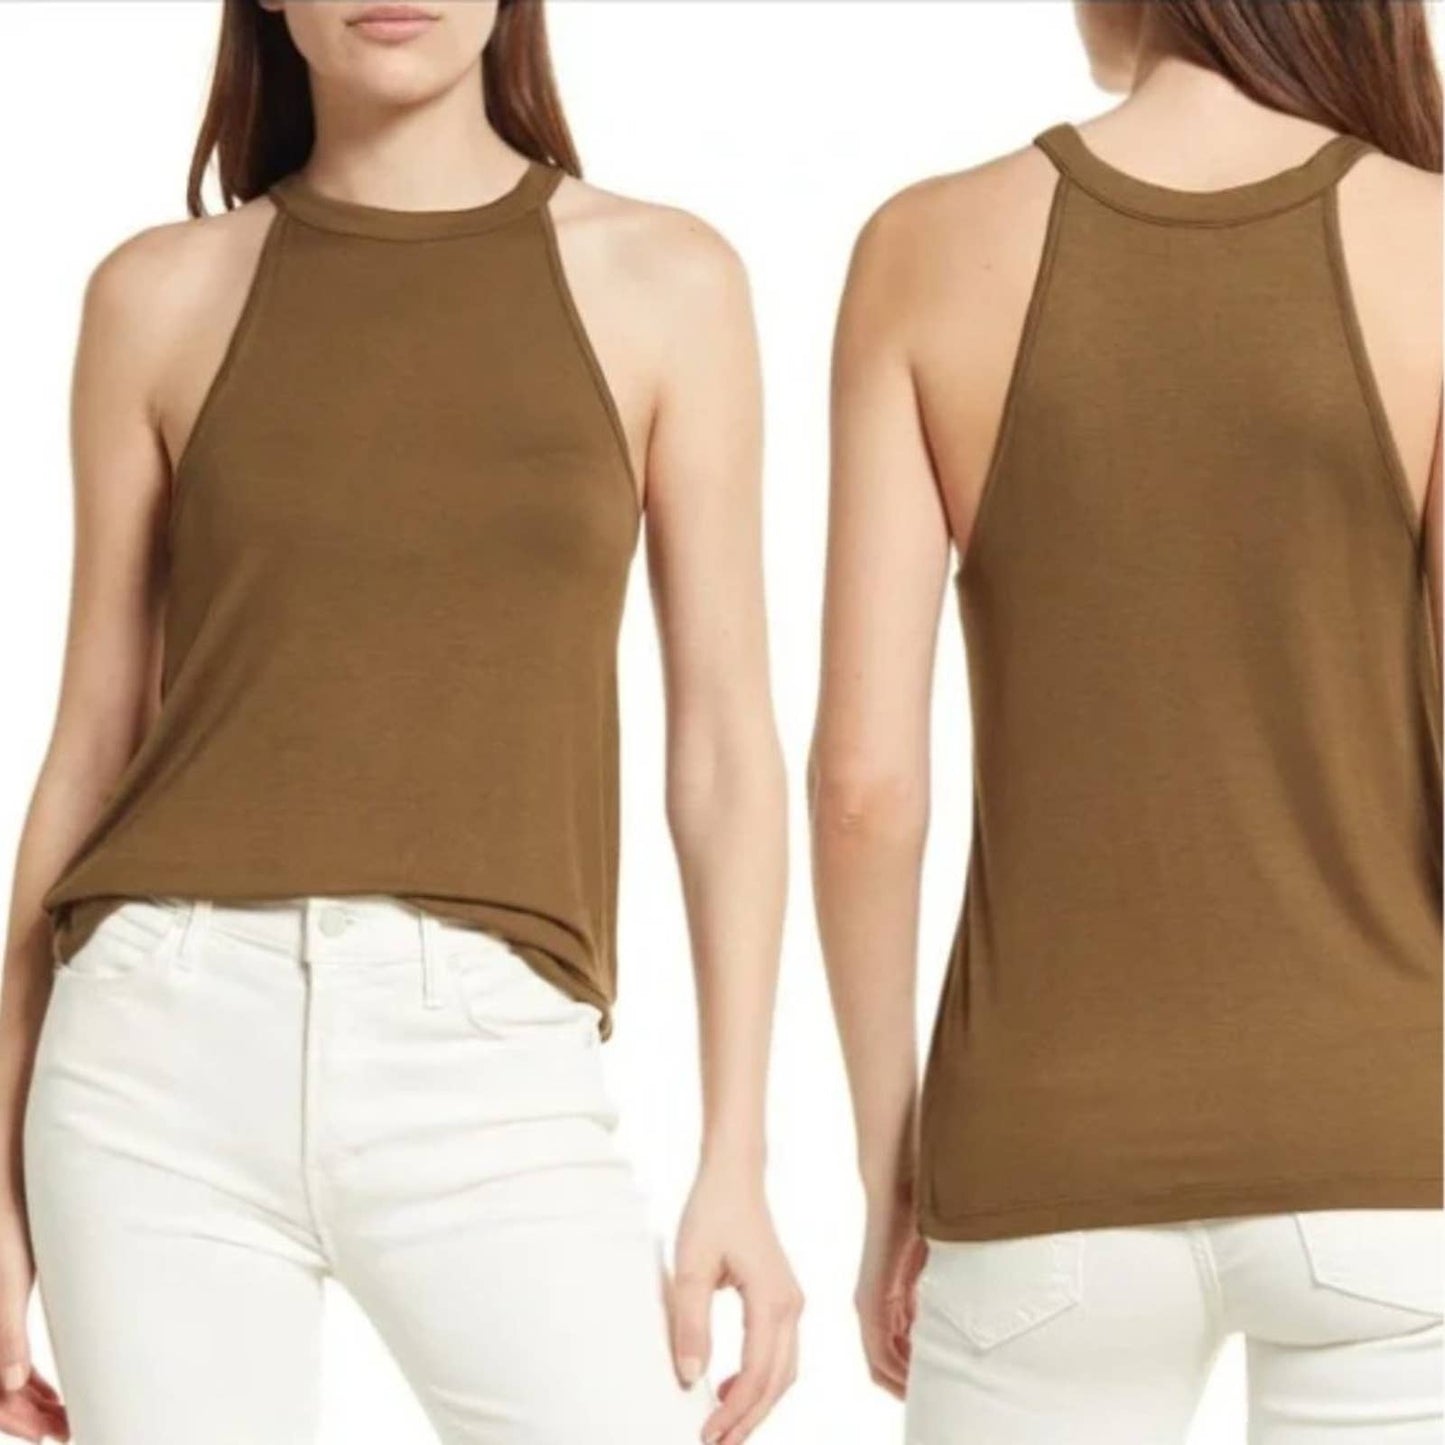 Melrose and Market High Neck Knit Tank Top in Olive Tree NWT